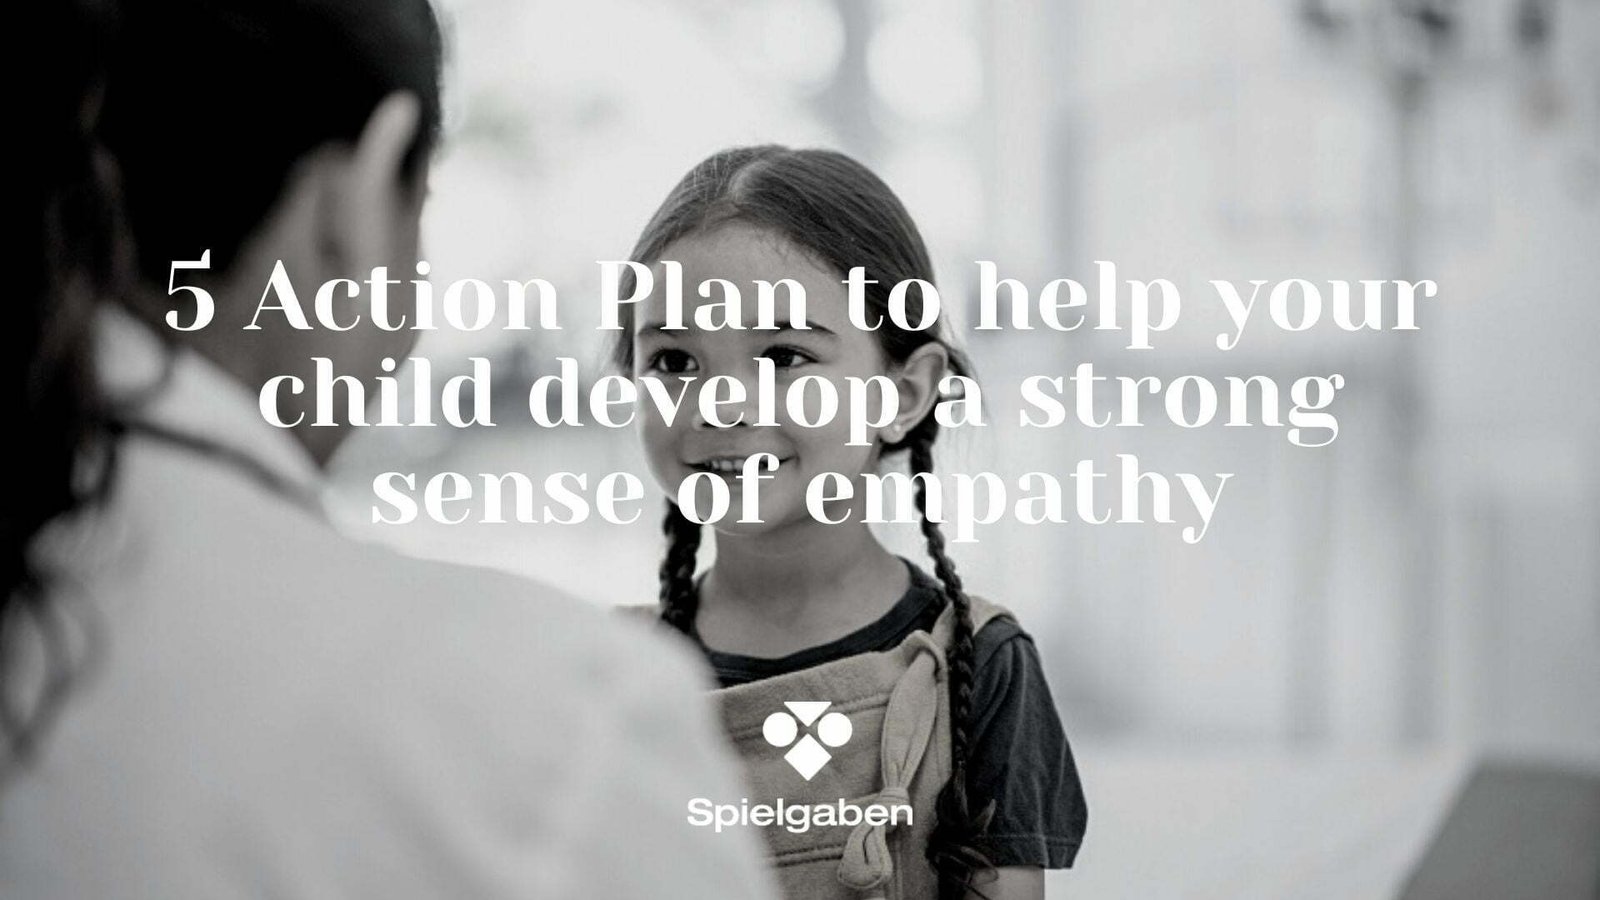 5 Action Plan to help your child develop a strong sense of empathy